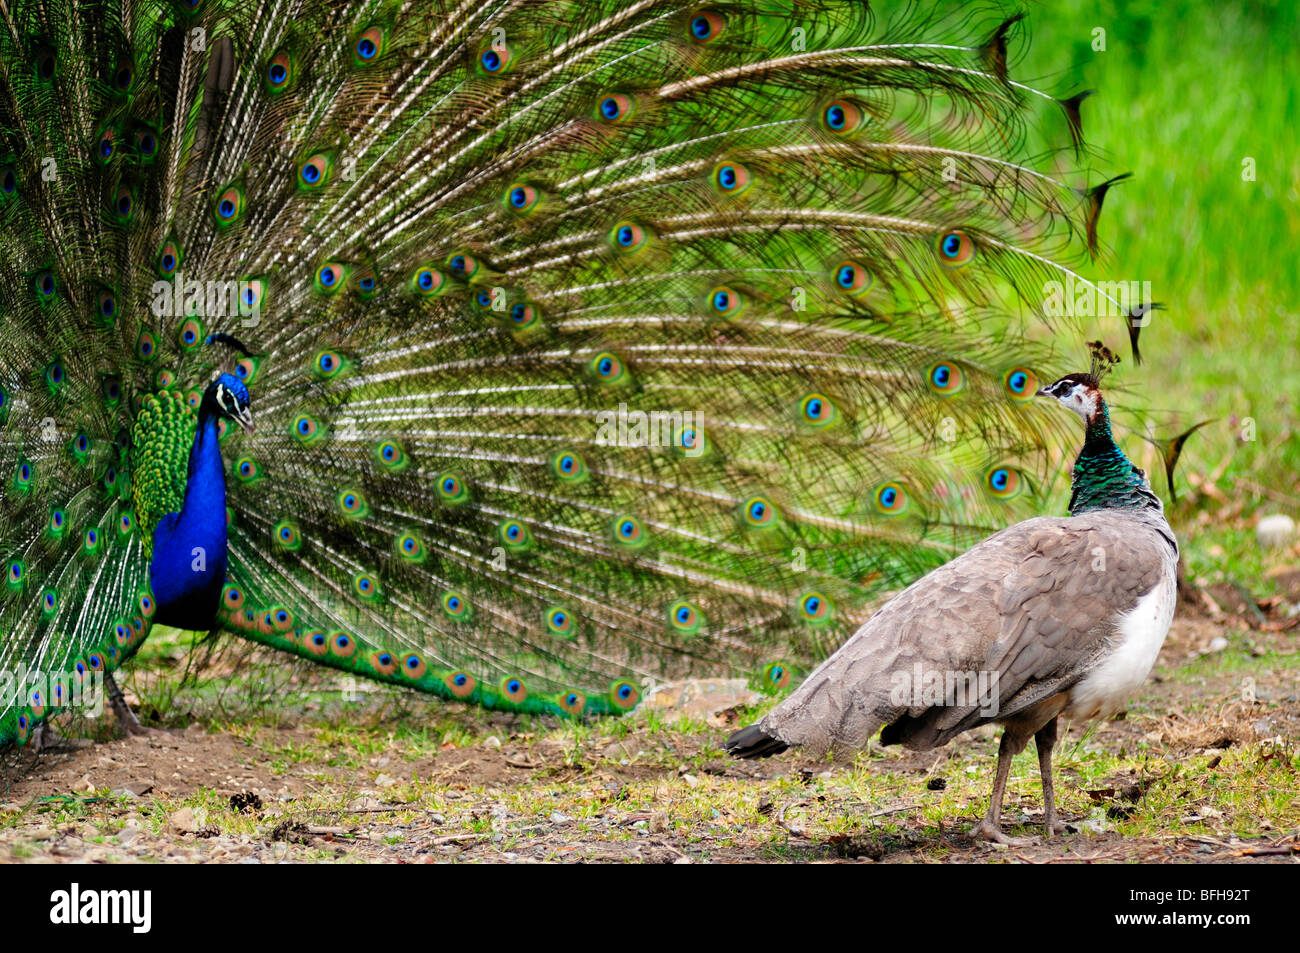 Female peacock prancing in front of male peacock with his plumage out. Stock Photo